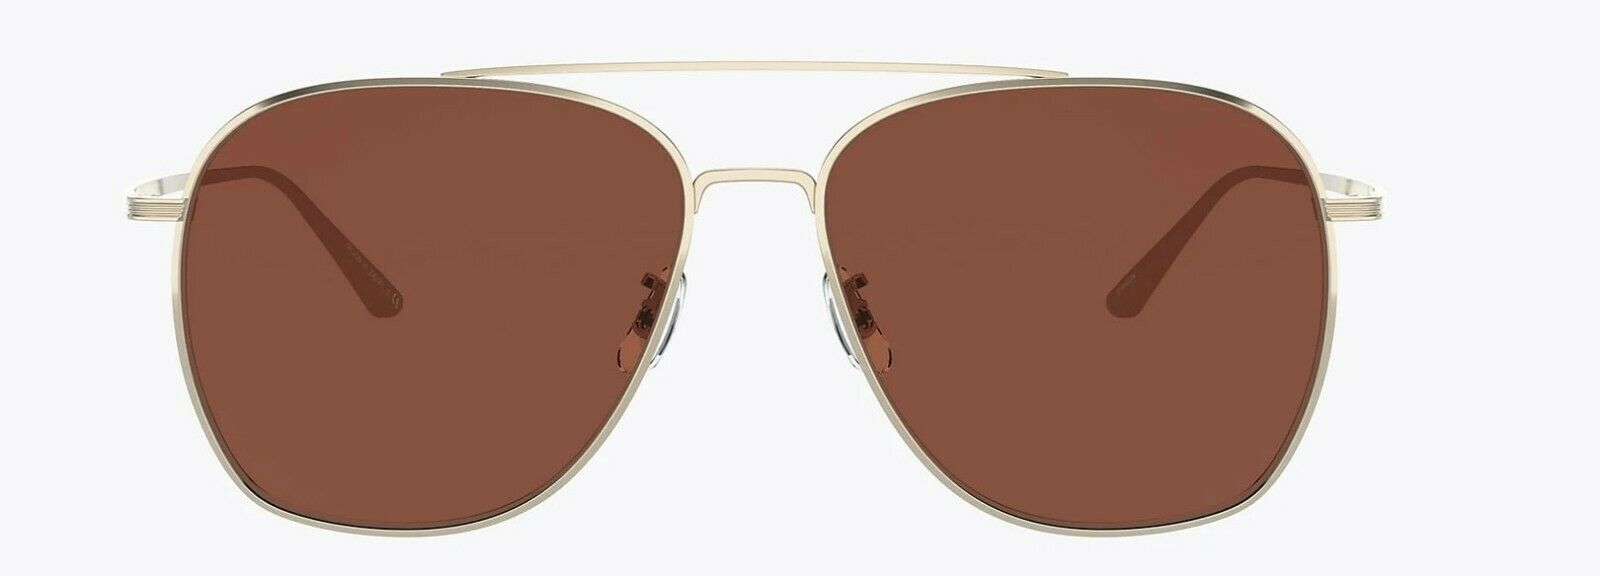 Oliver Peoples Sunglasses 1278ST 5292C5 The Row Ellerston Gold / Burgundy 58mm-827934450929-classypw.com-1